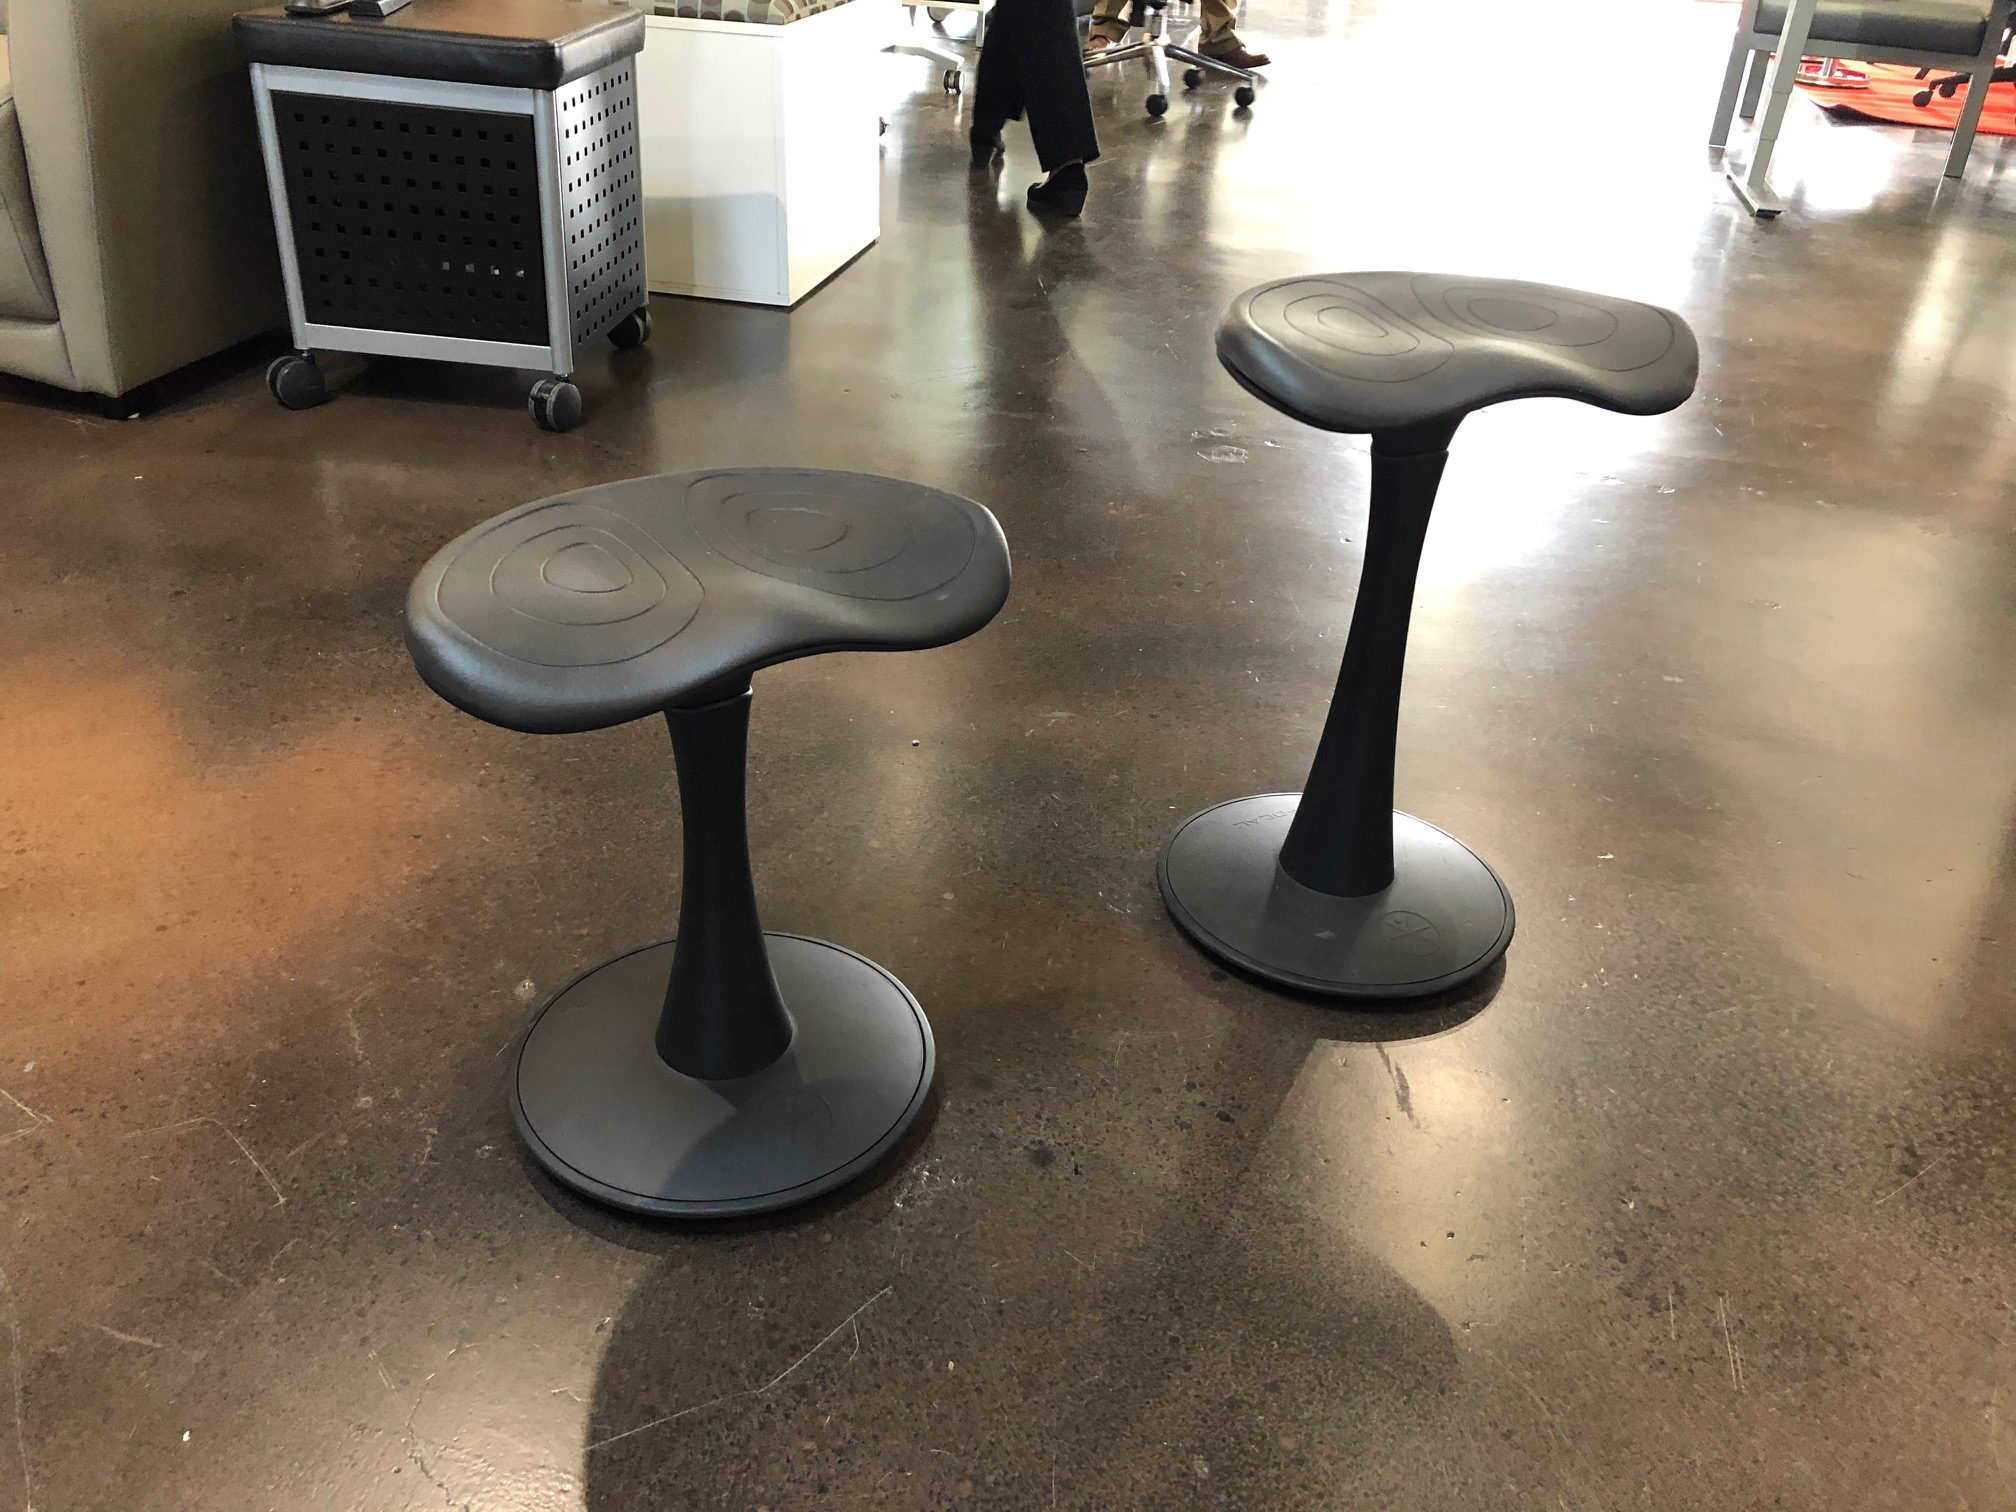 Black and Red Stools at white desk